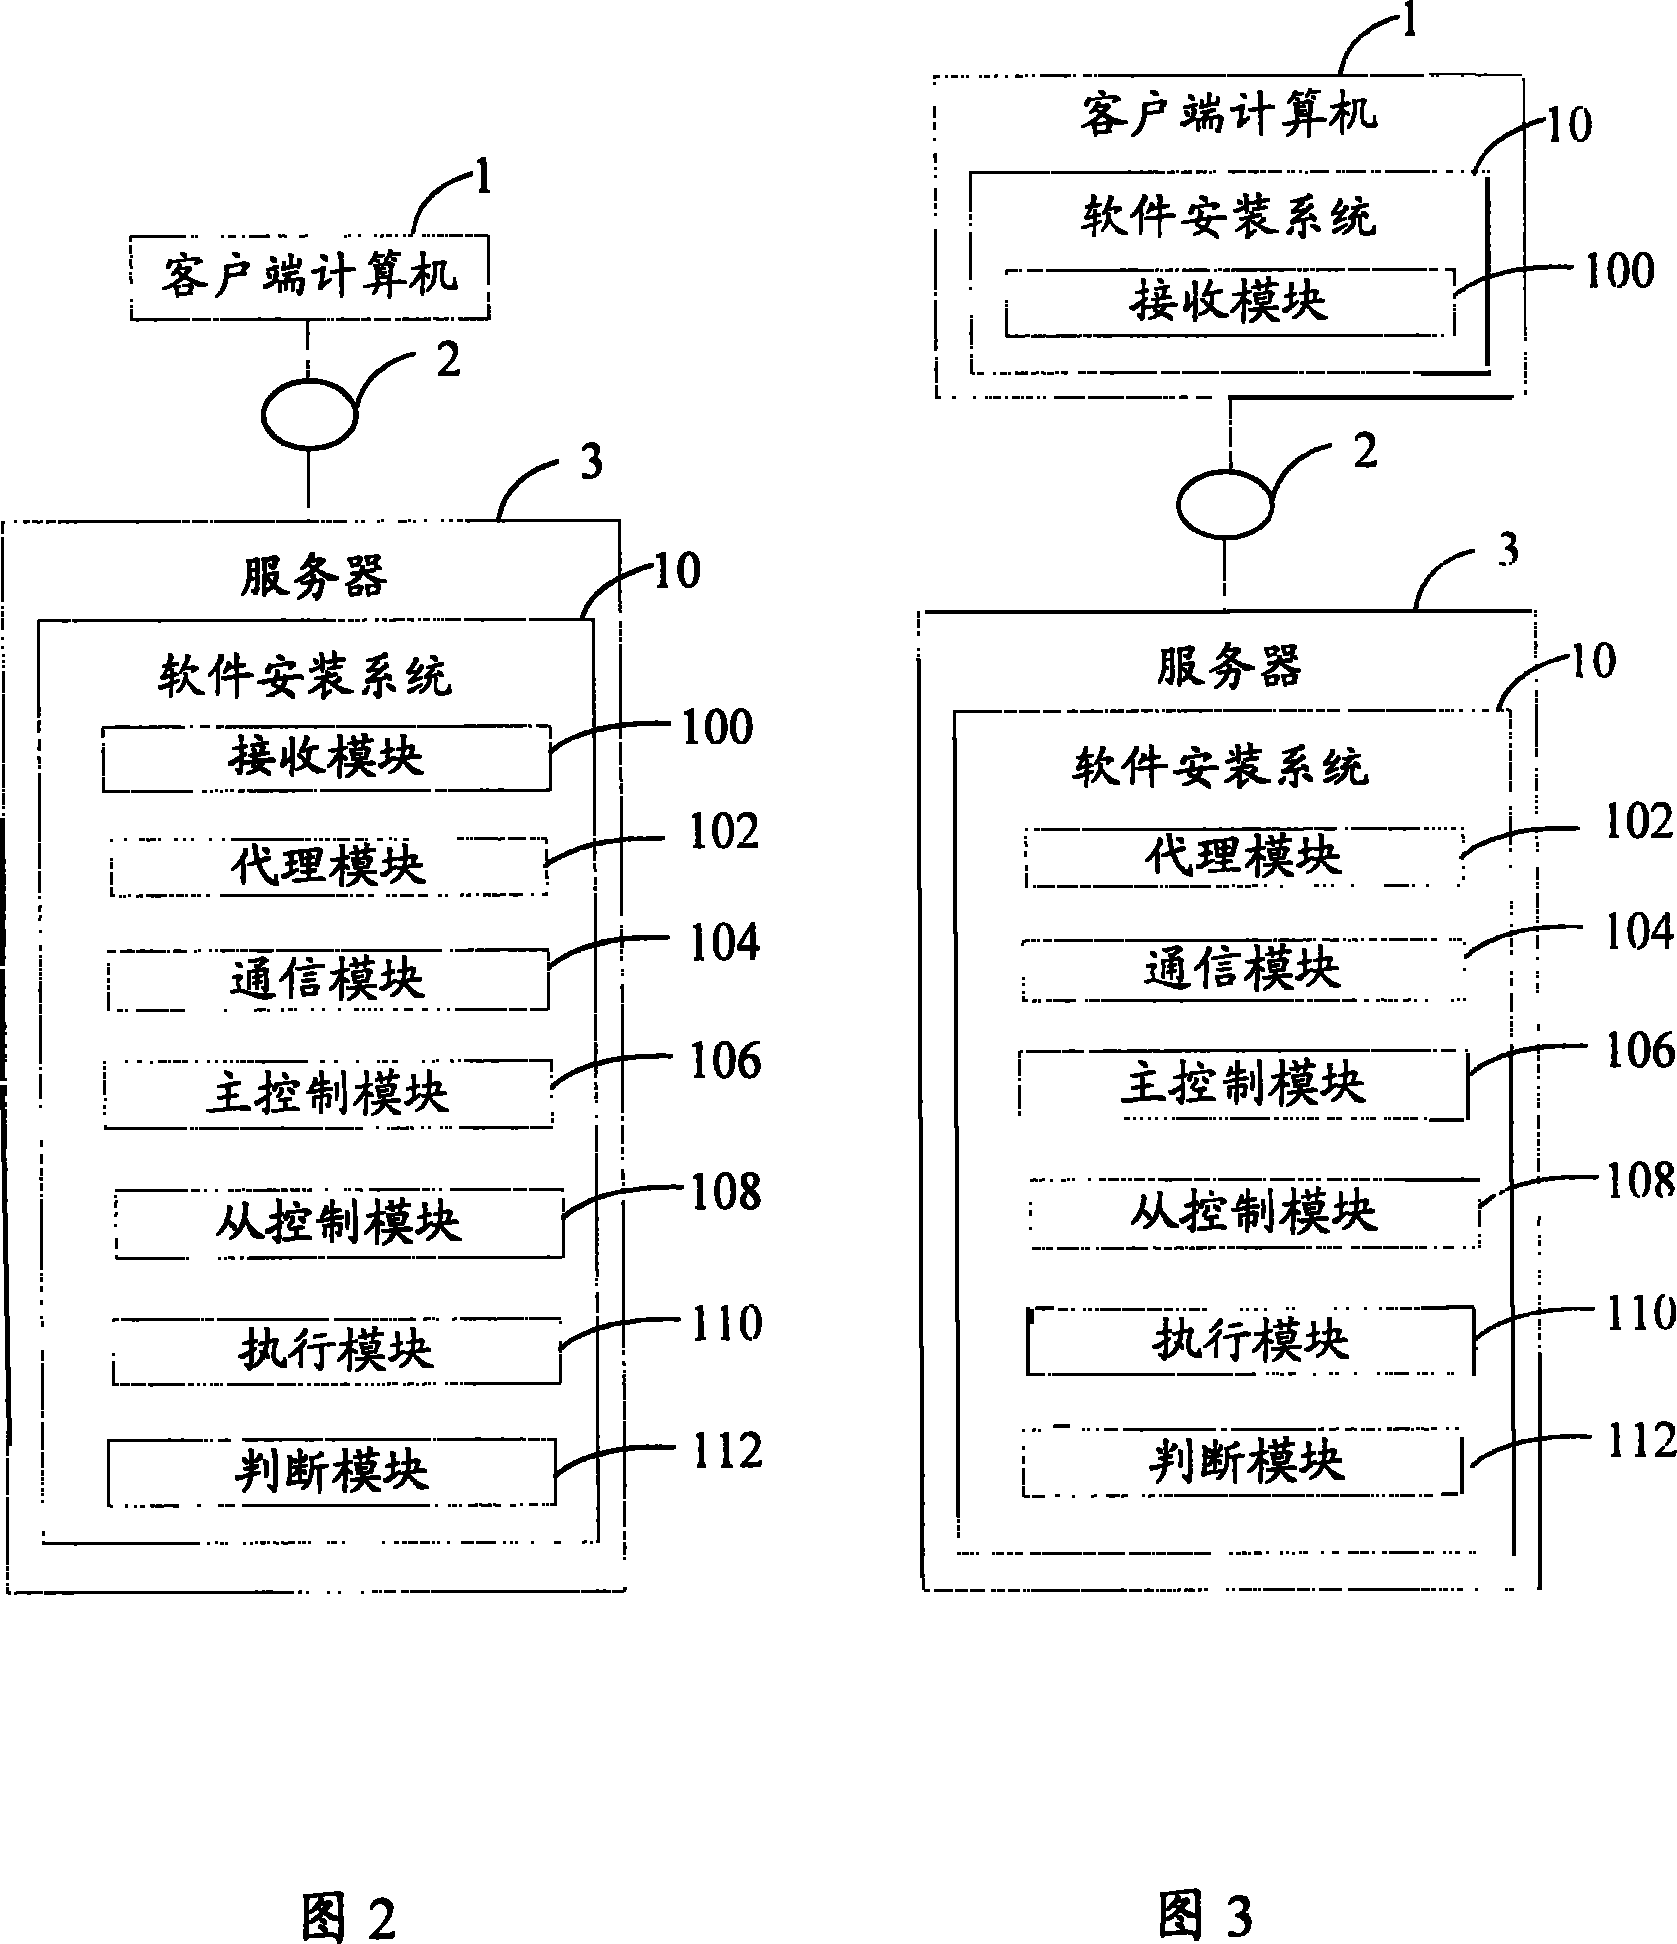 Software installation system and method